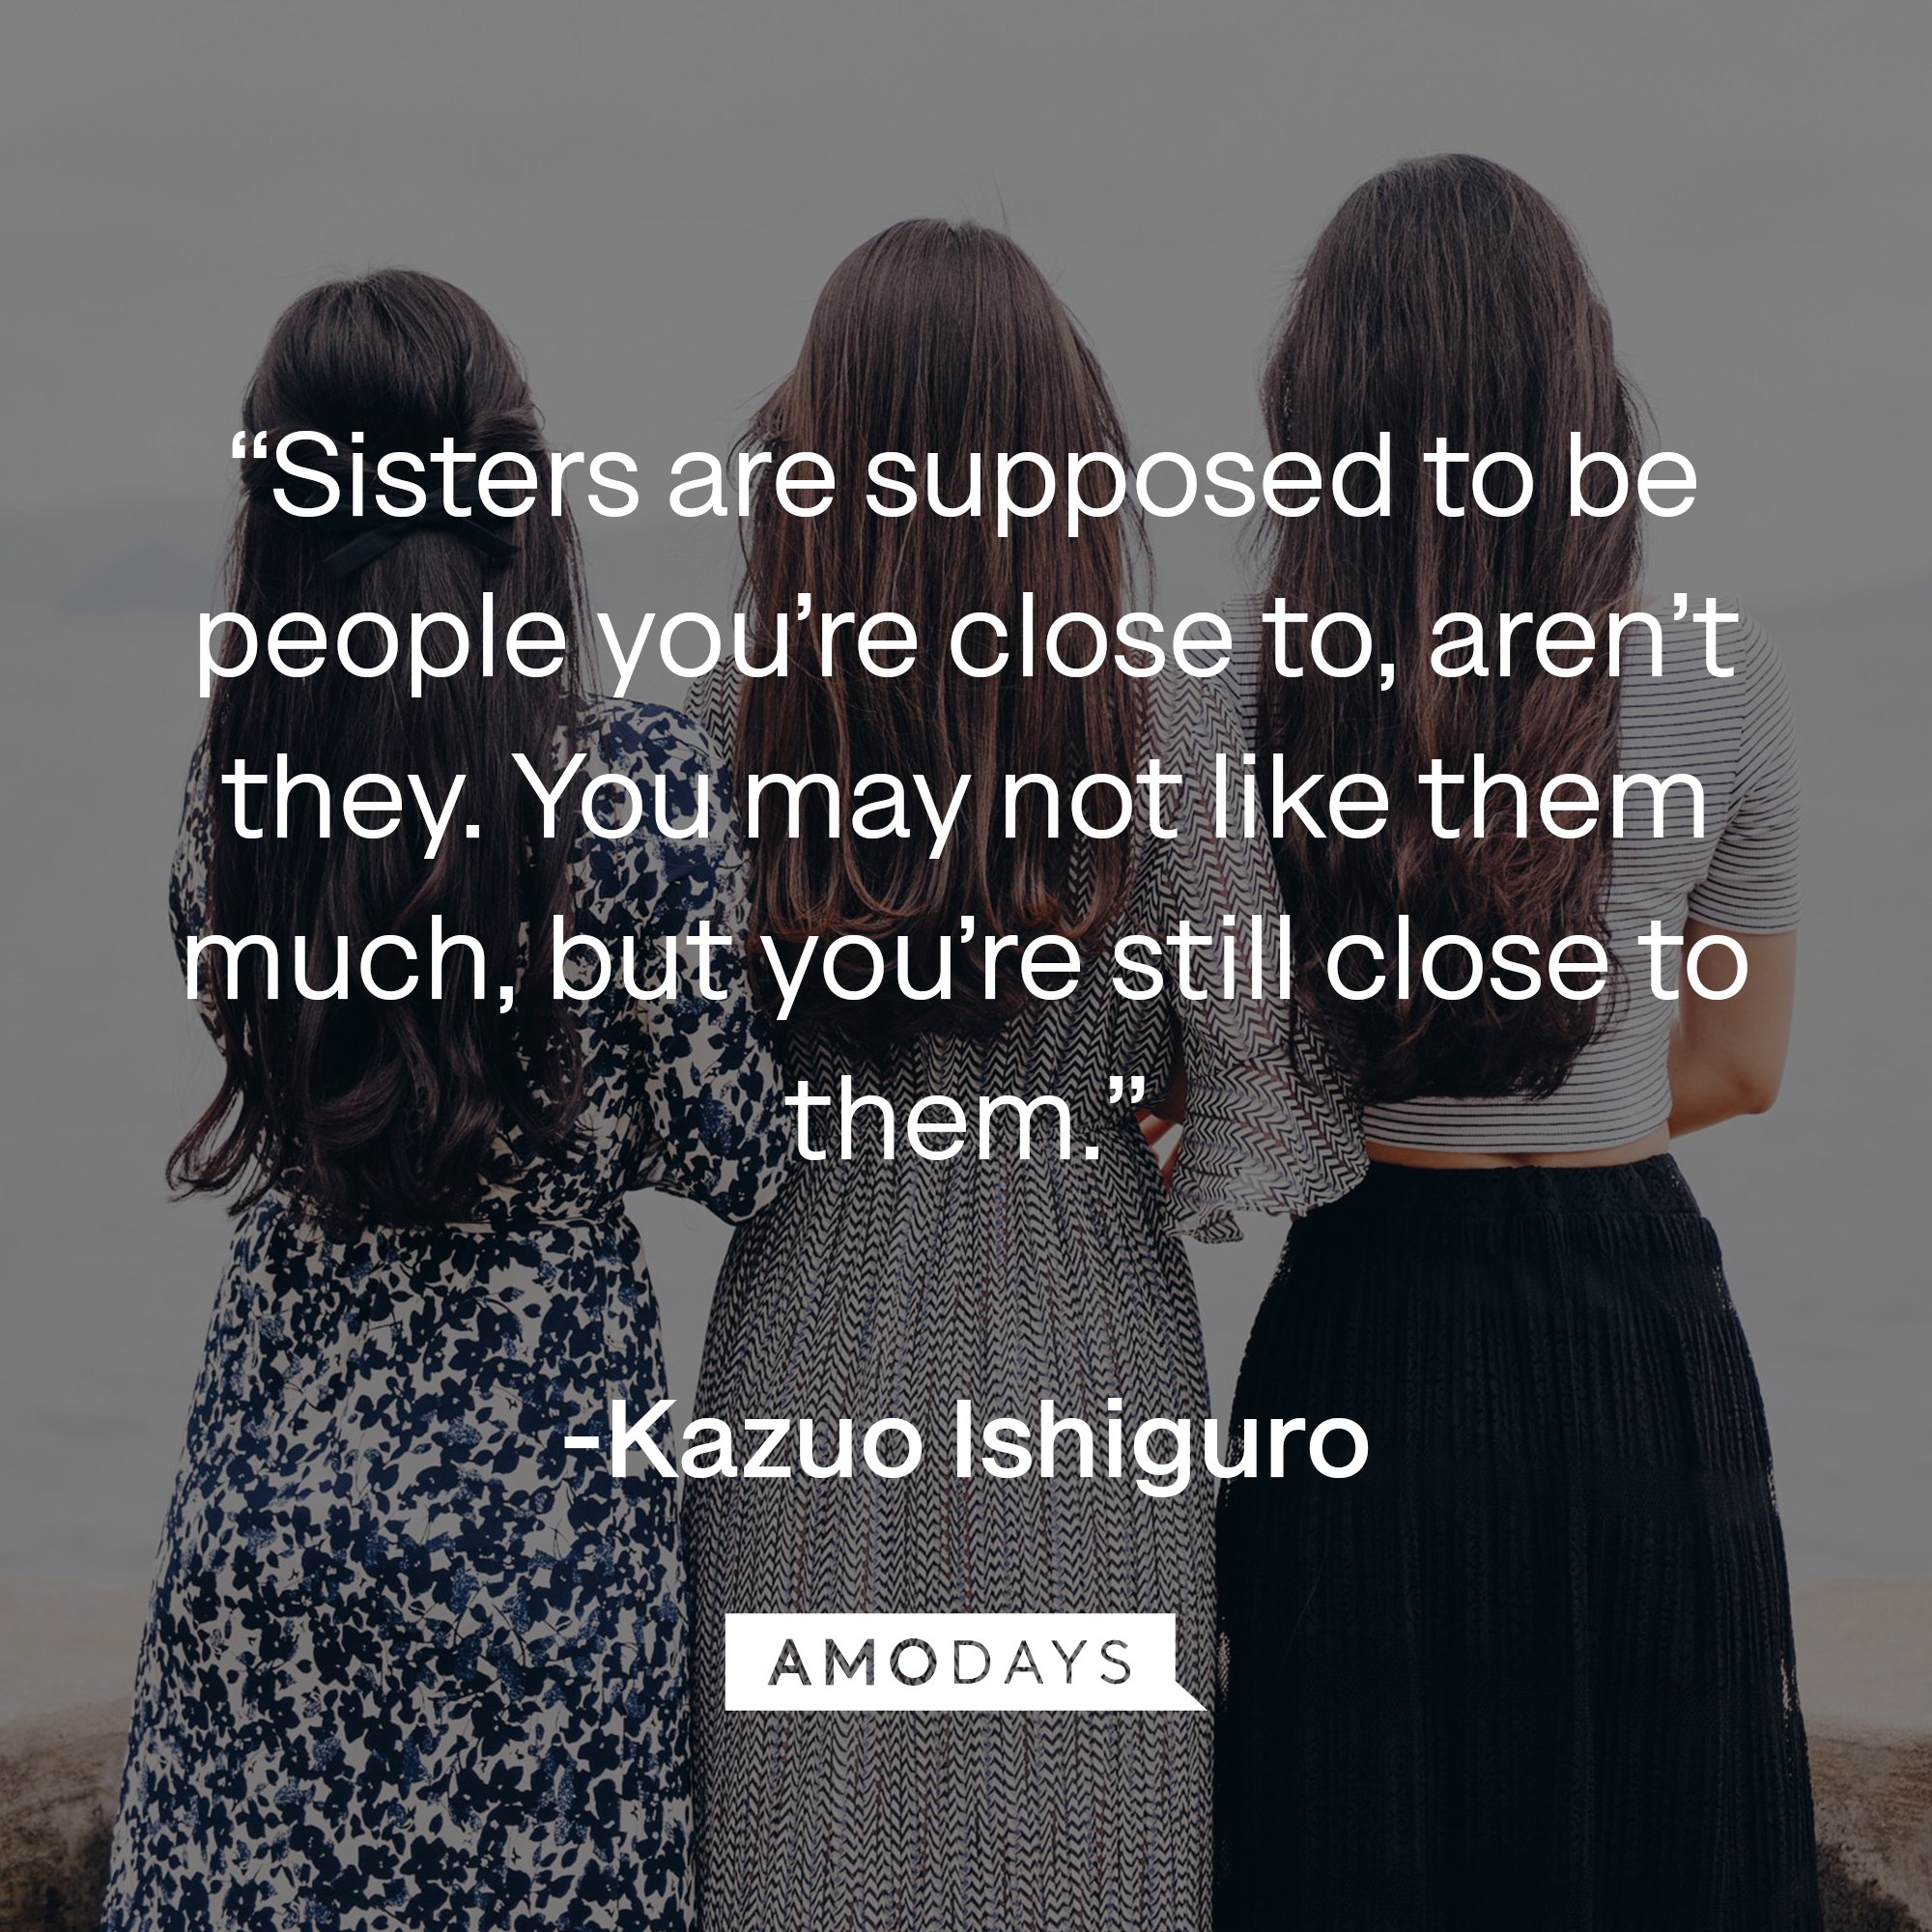  Kazuo Ishiguro's quote: “Sisters are supposed to be people you’re close to, aren’t they. You may not like them much, but you’re still close to them.” | Image: AmoDays